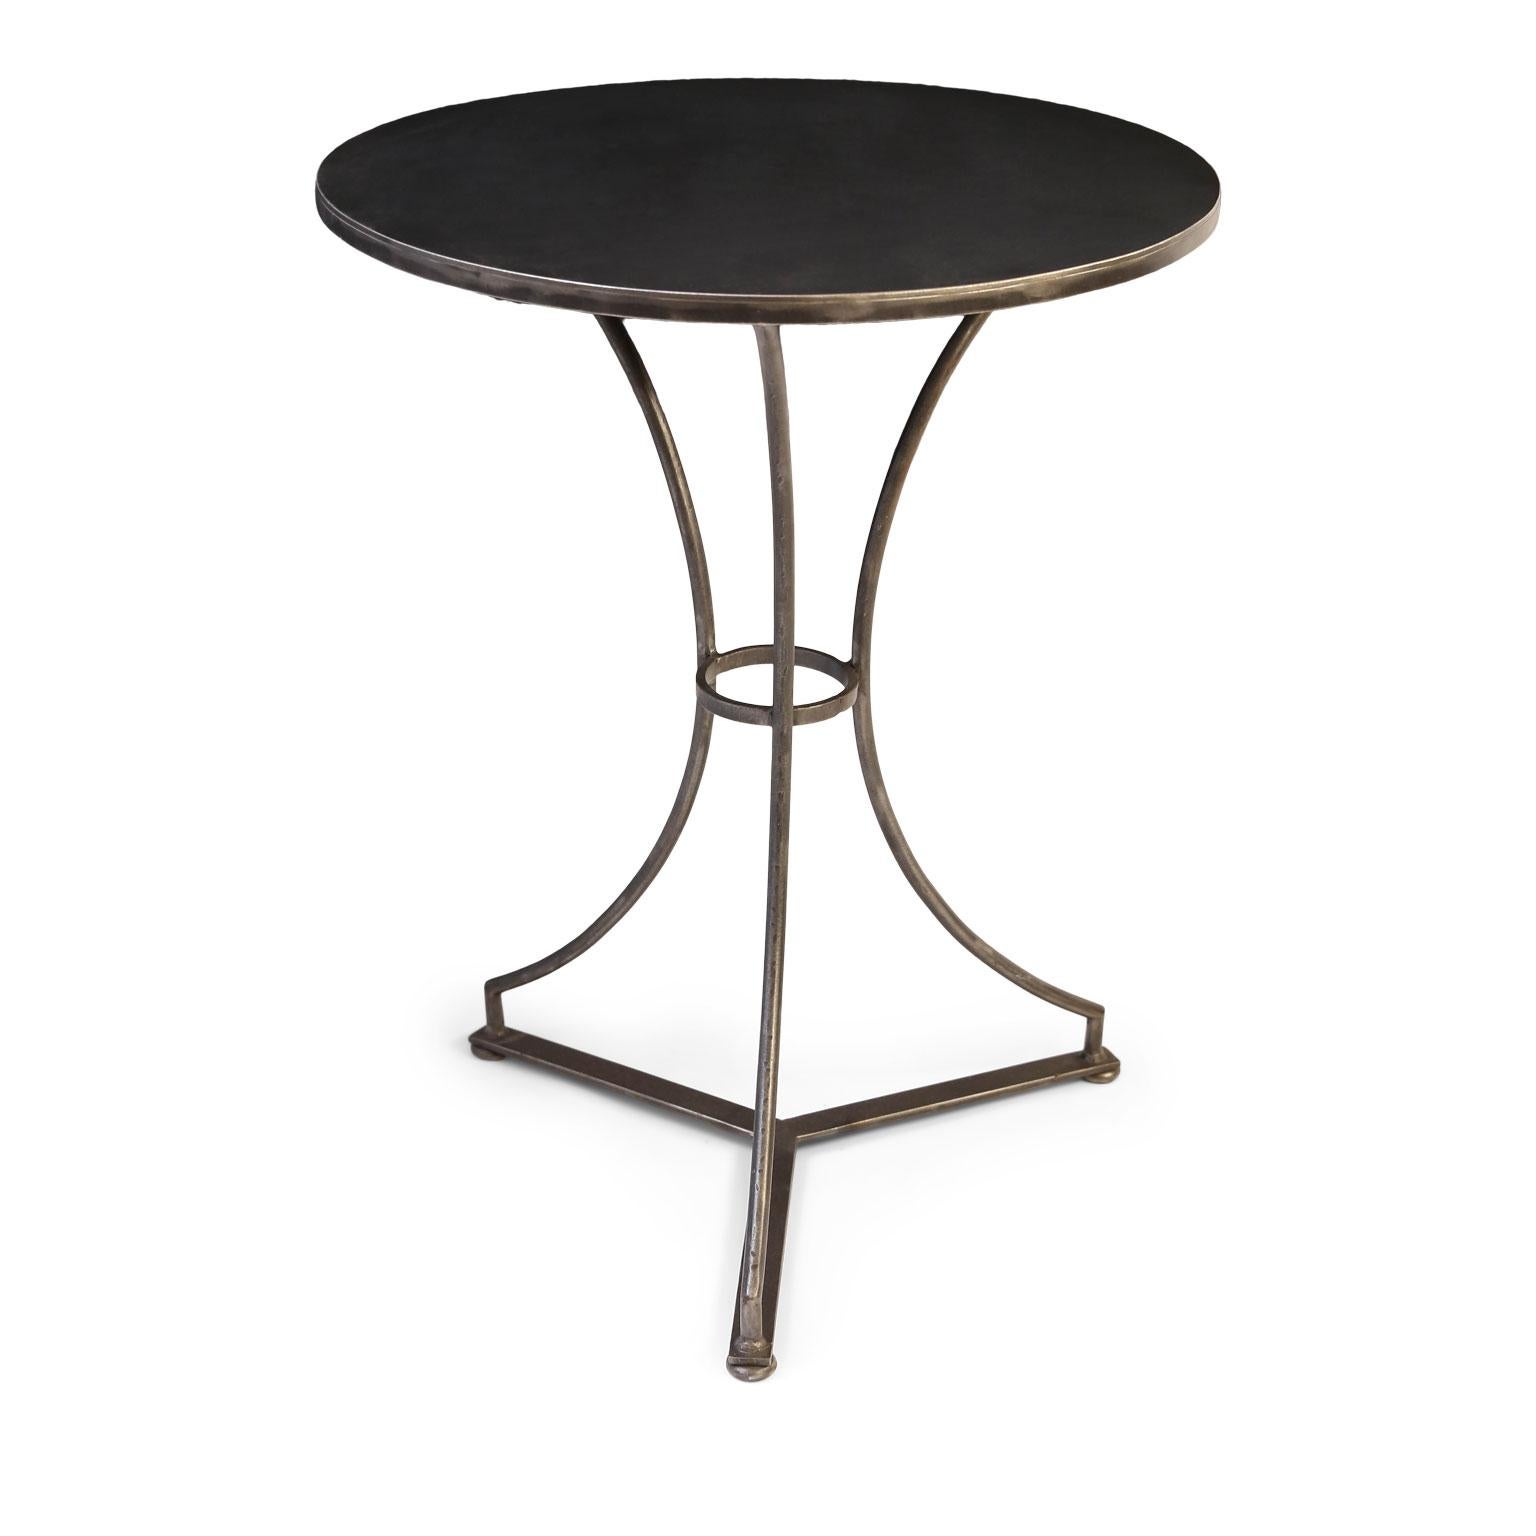 French Provincial Steel Garden Tables